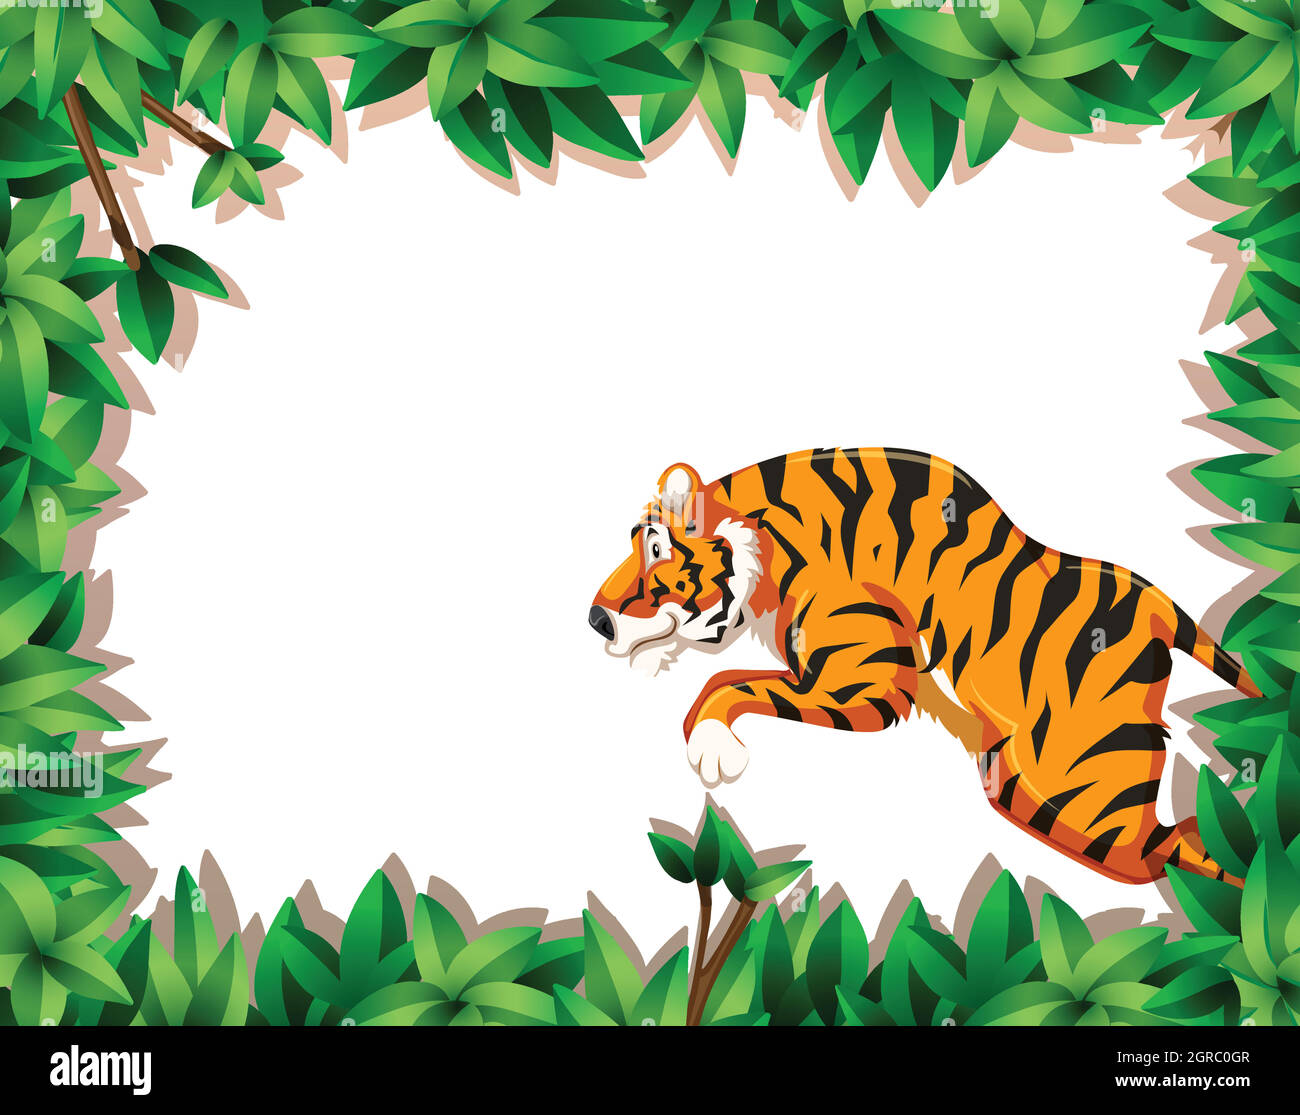 Jumping tiger nature scene Stock Vector